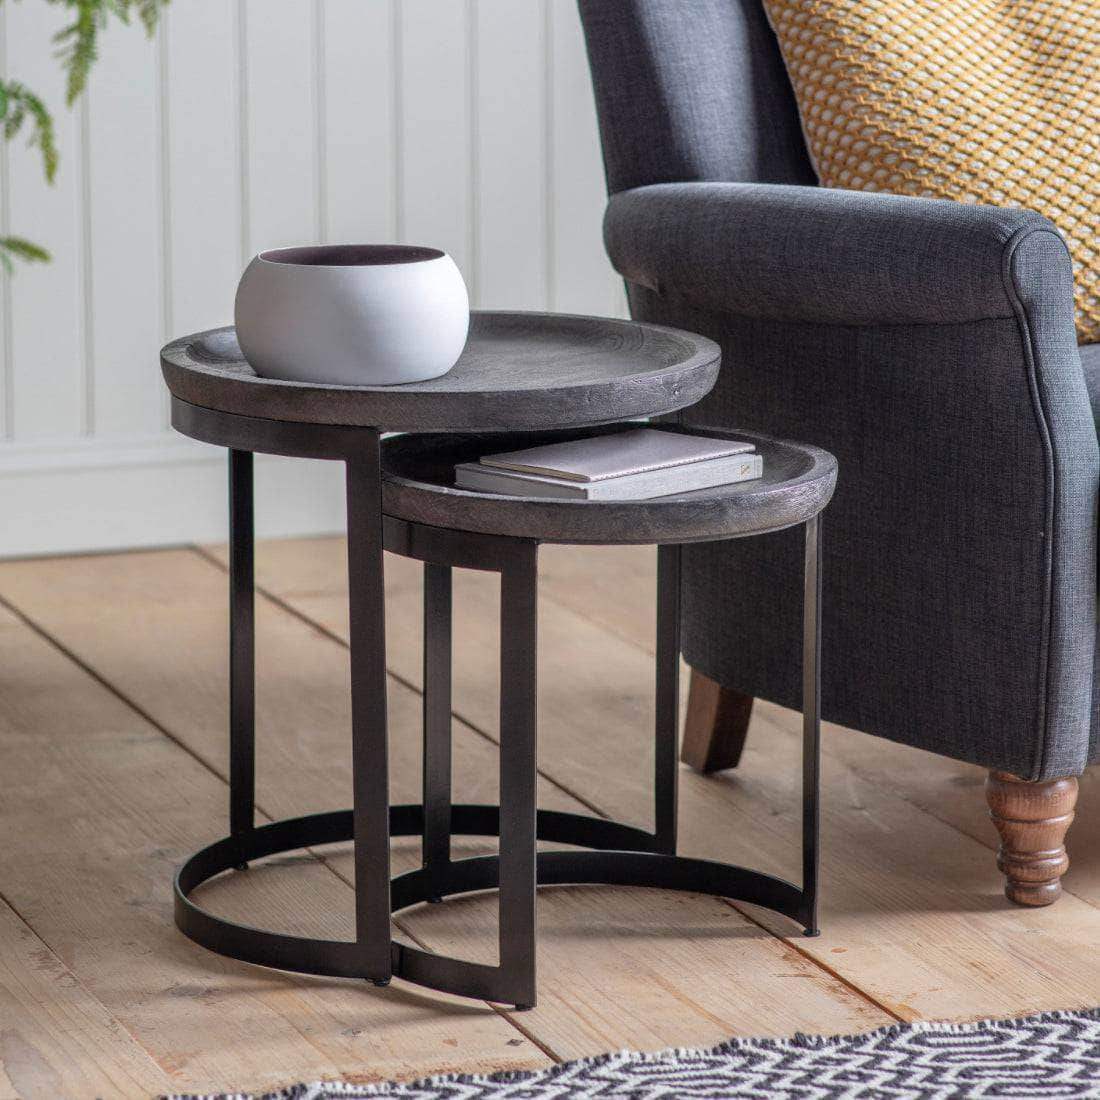 Functional Side Tables